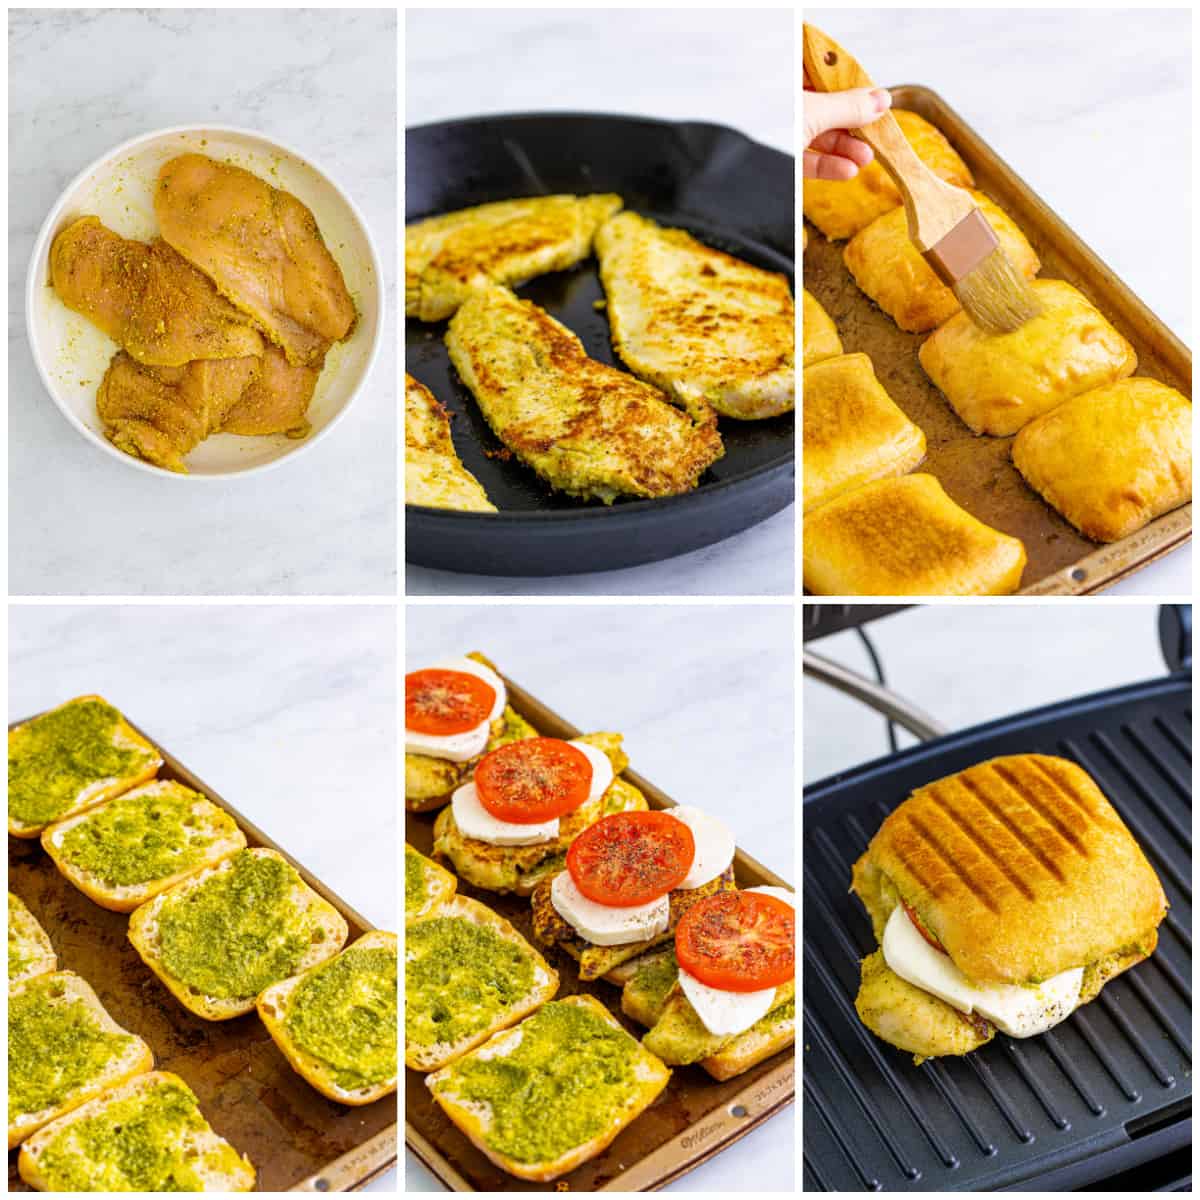 Step by step photos on how to make a Pesto Chicken Sandwich.